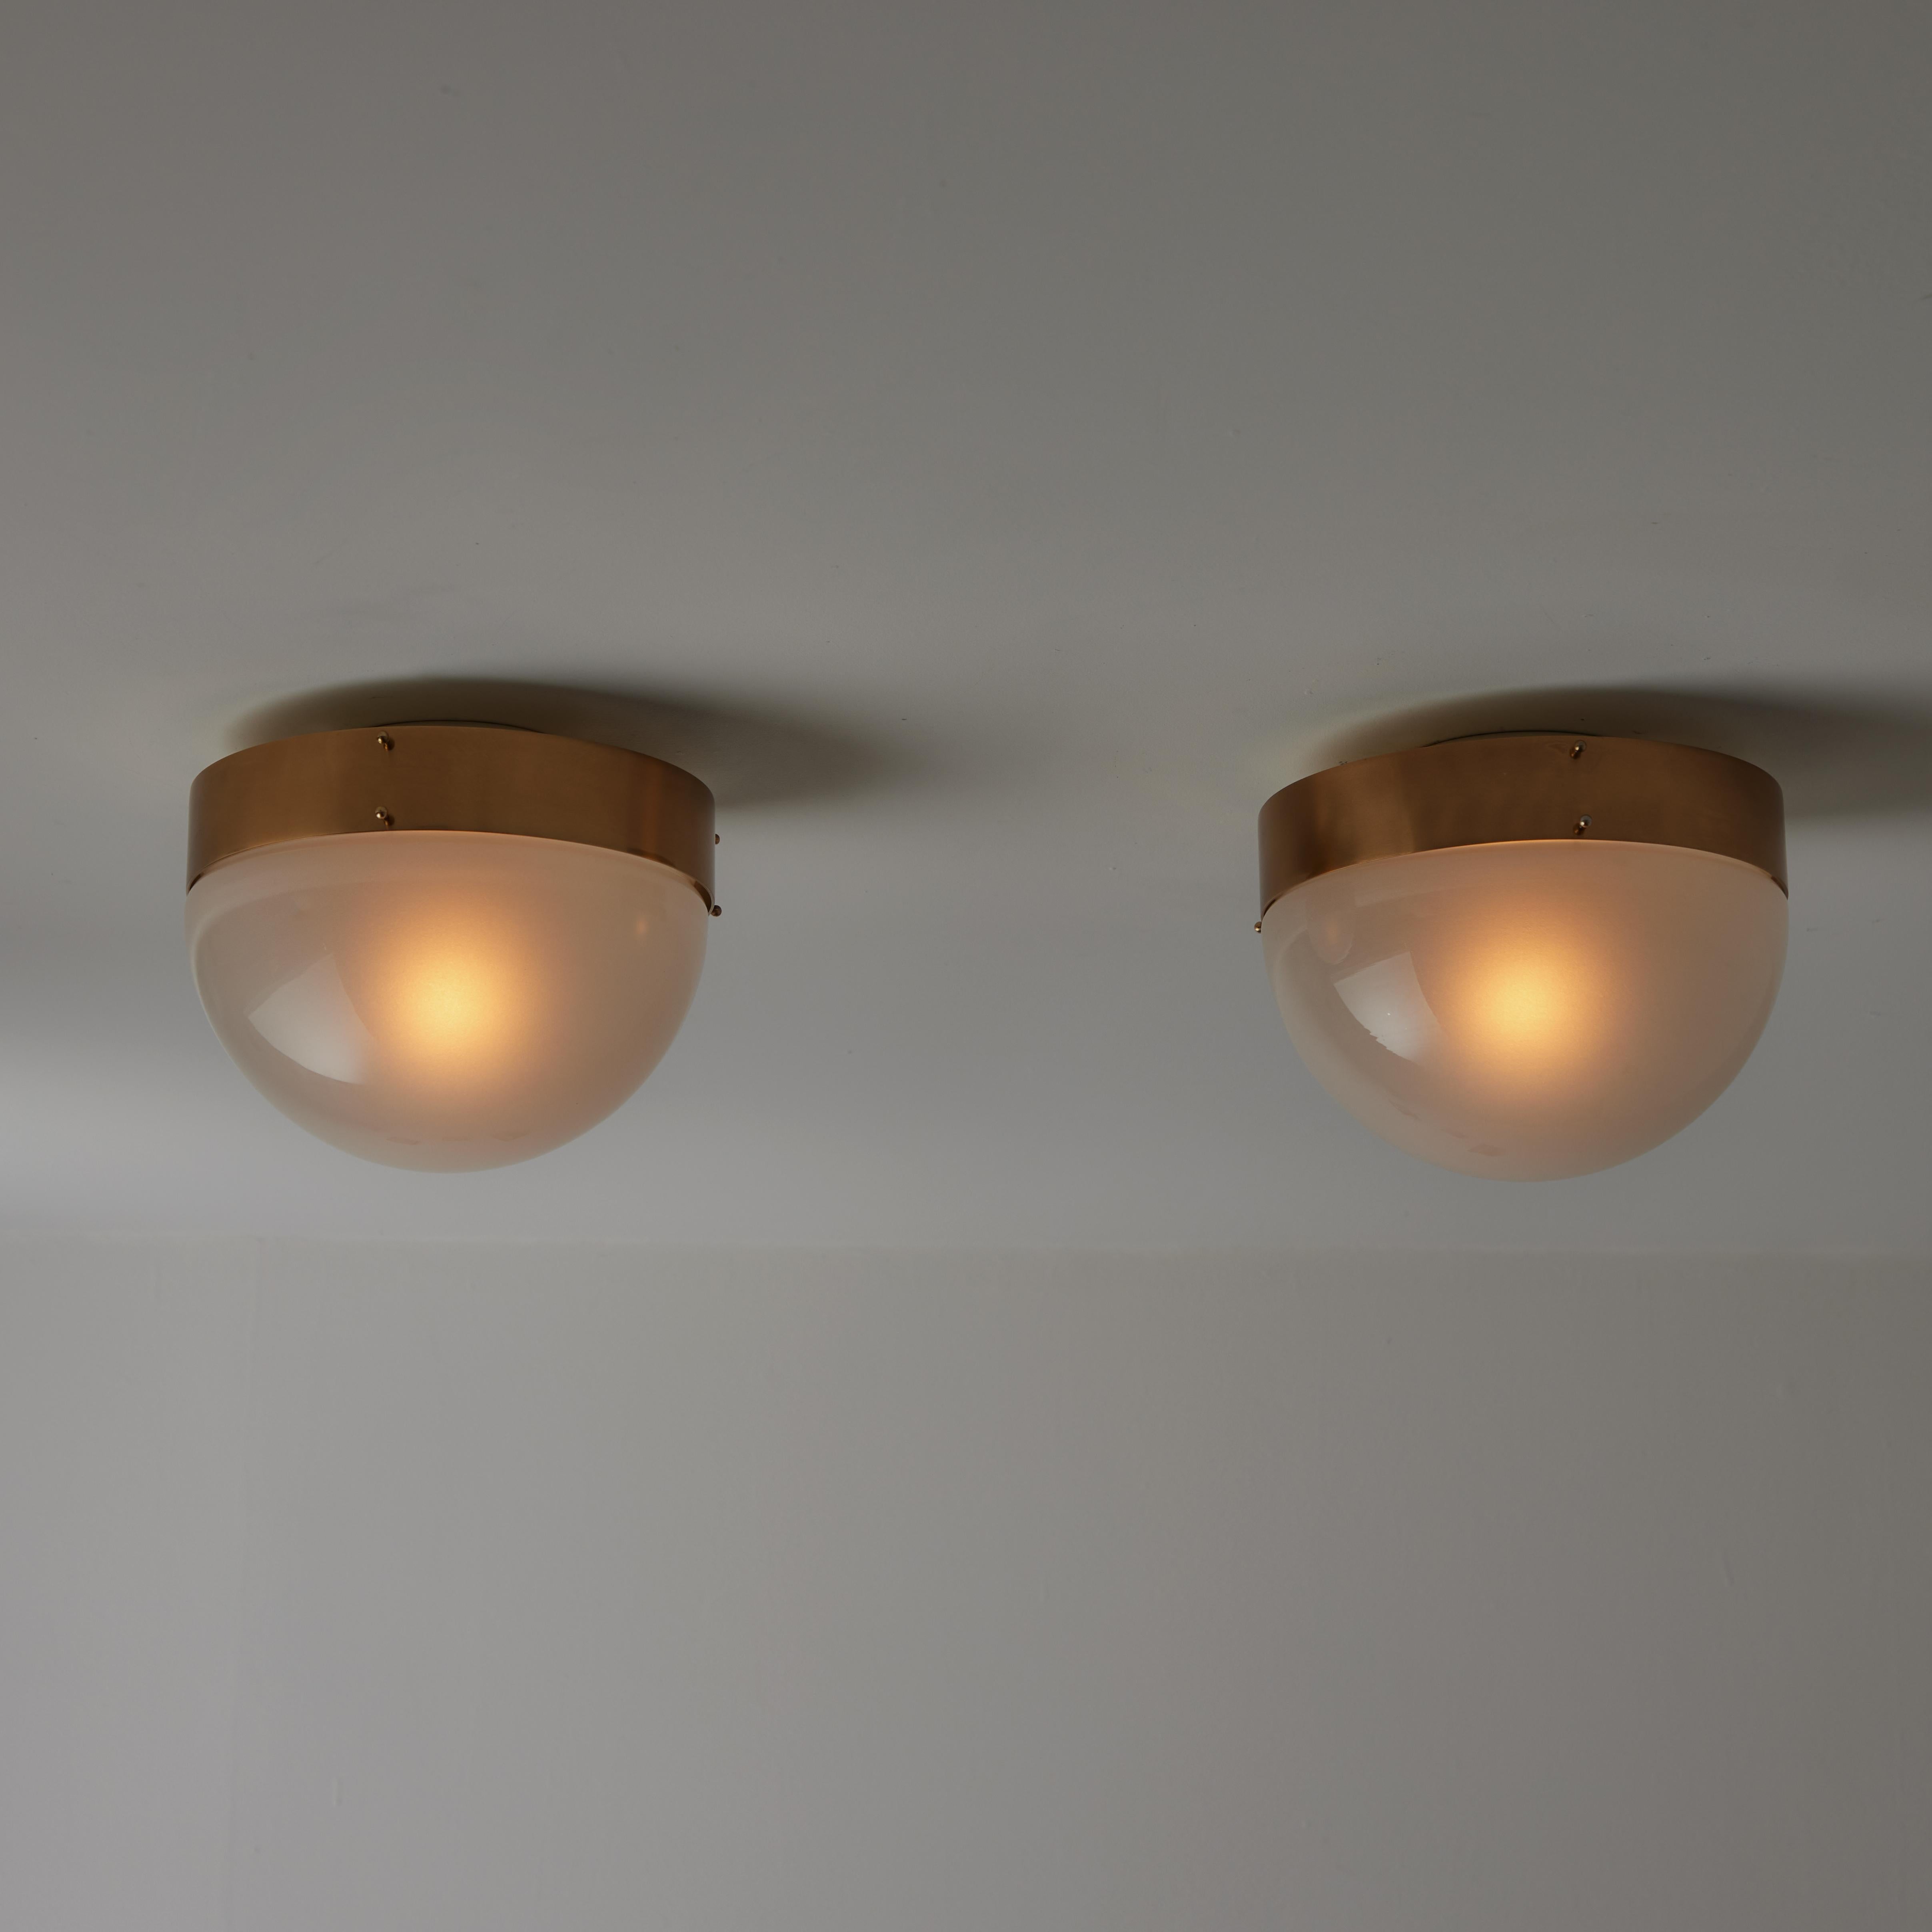 'Demi Clio' flushmounts by Sergio Mazza for Artemide. Designed and manufactured in Italy, circa the 1960s. Clear sandblasted glass diffuser paired with polished aged brass outer ring. Each light holds an E27 socket type, adaptive to the US. Rewired